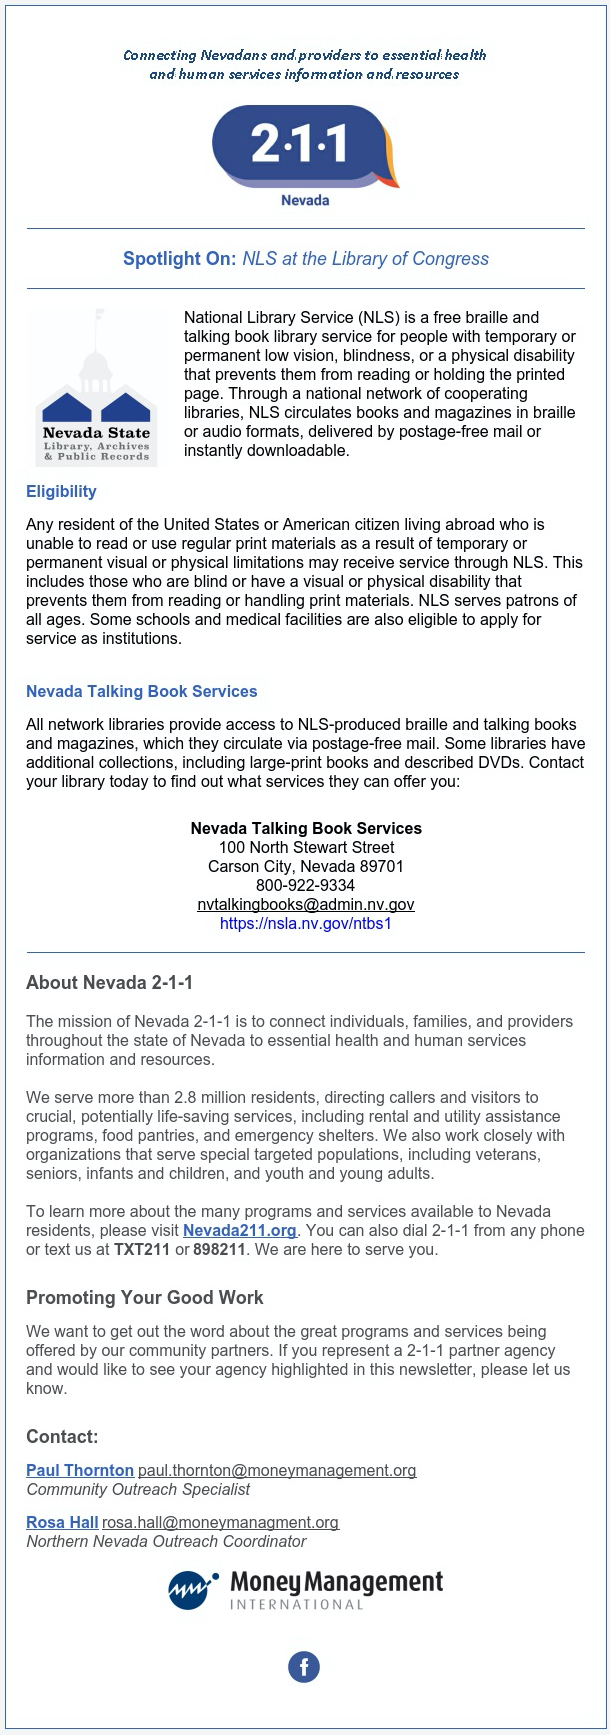 Nevada 211 Newsletter April 2020 Honoring Nevada Talking Book Services